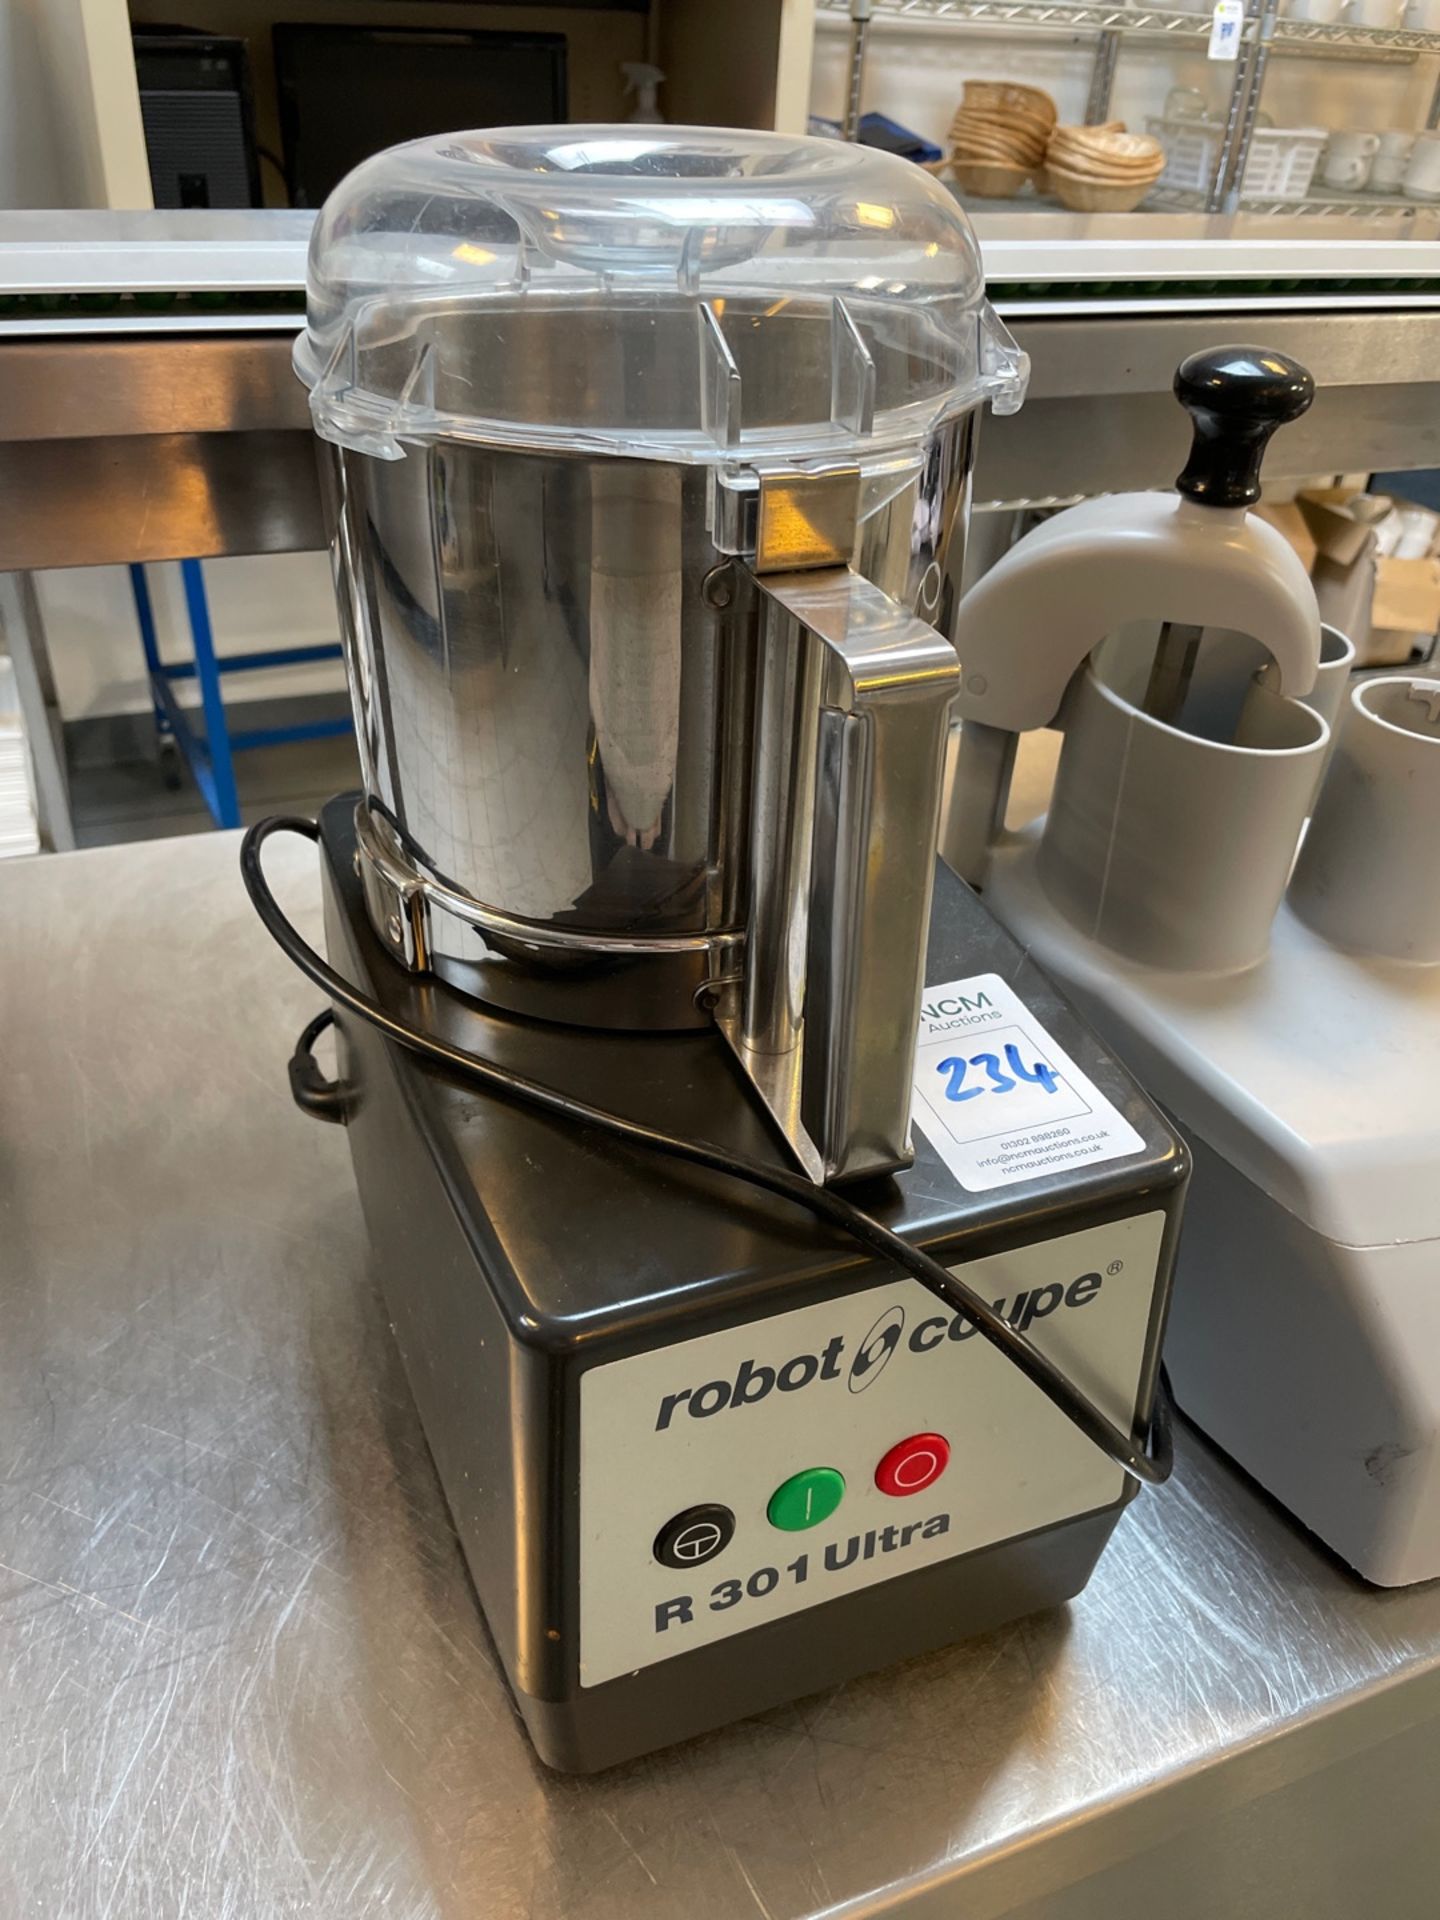 Robot Coupe R301 Ultra Food Processor - Image 3 of 4